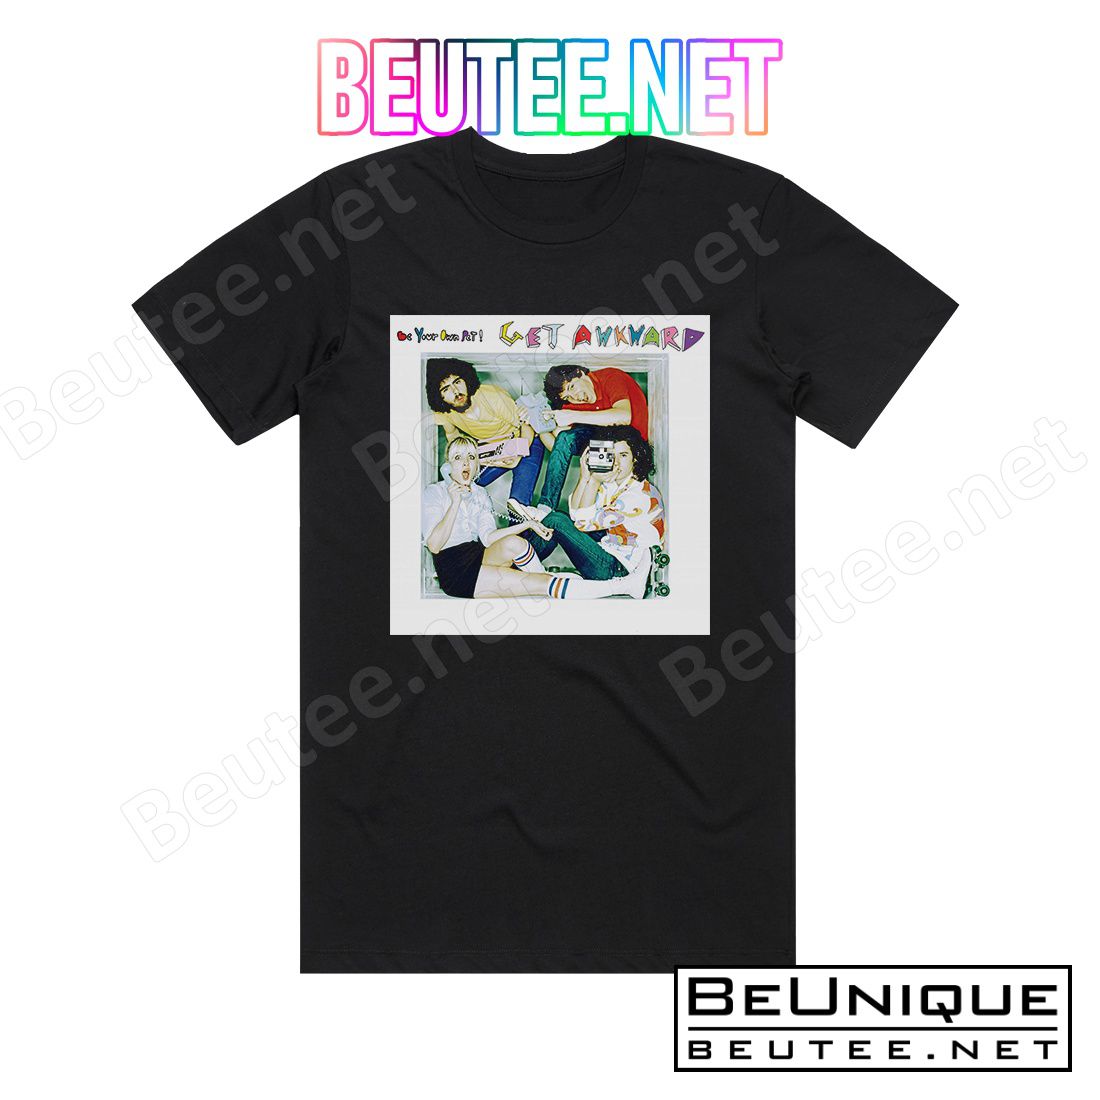 Be Your Own Pet Get Awkward Album Cover T-Shirt